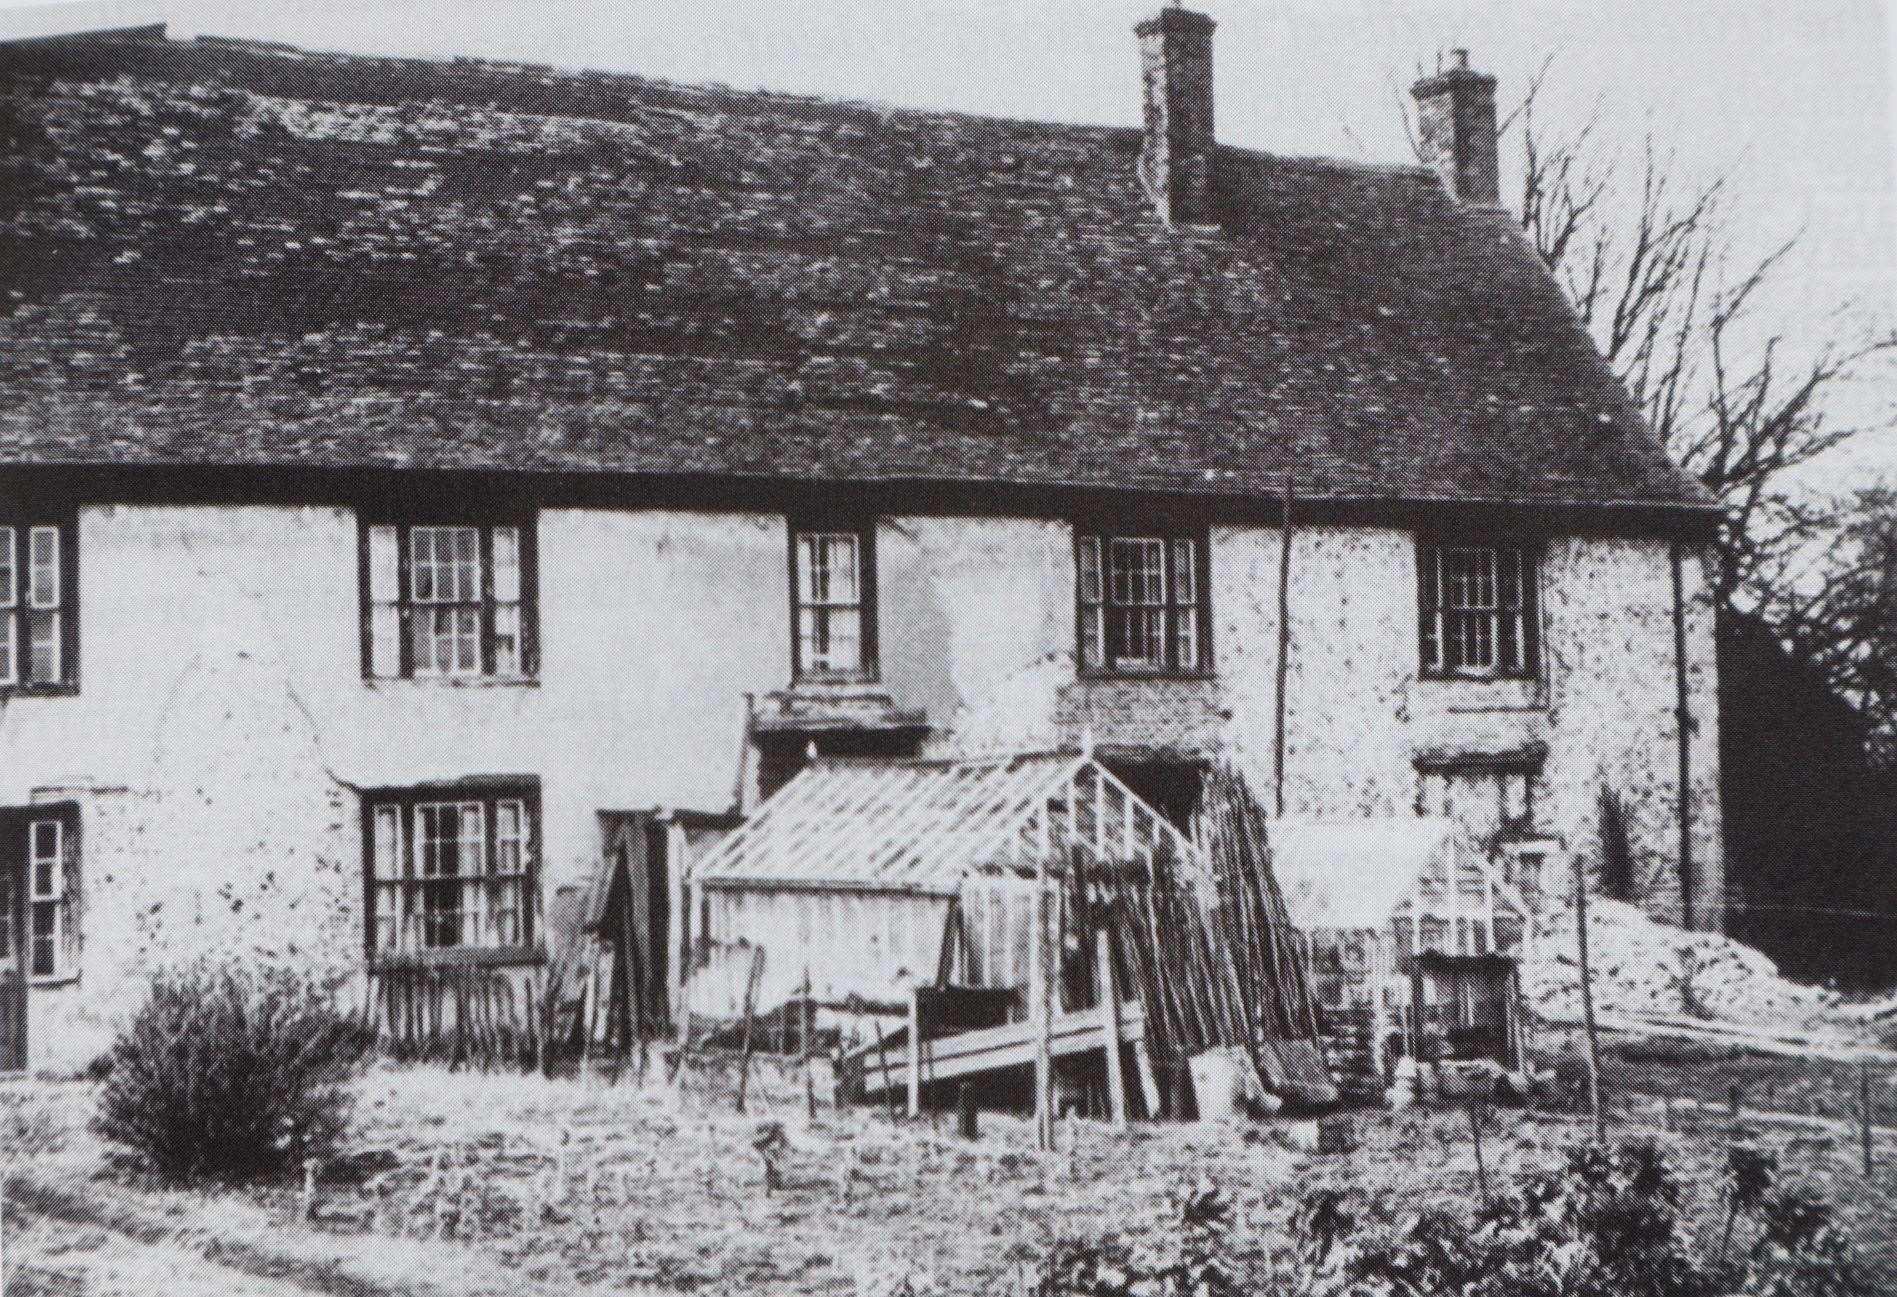 Chantry House, Bredgar, when it was divided into separate homes. Robert Burgess died there in 1937 after falling down a well Picture from Bredgar: The History of a Kentish Parish by Helen Allinson